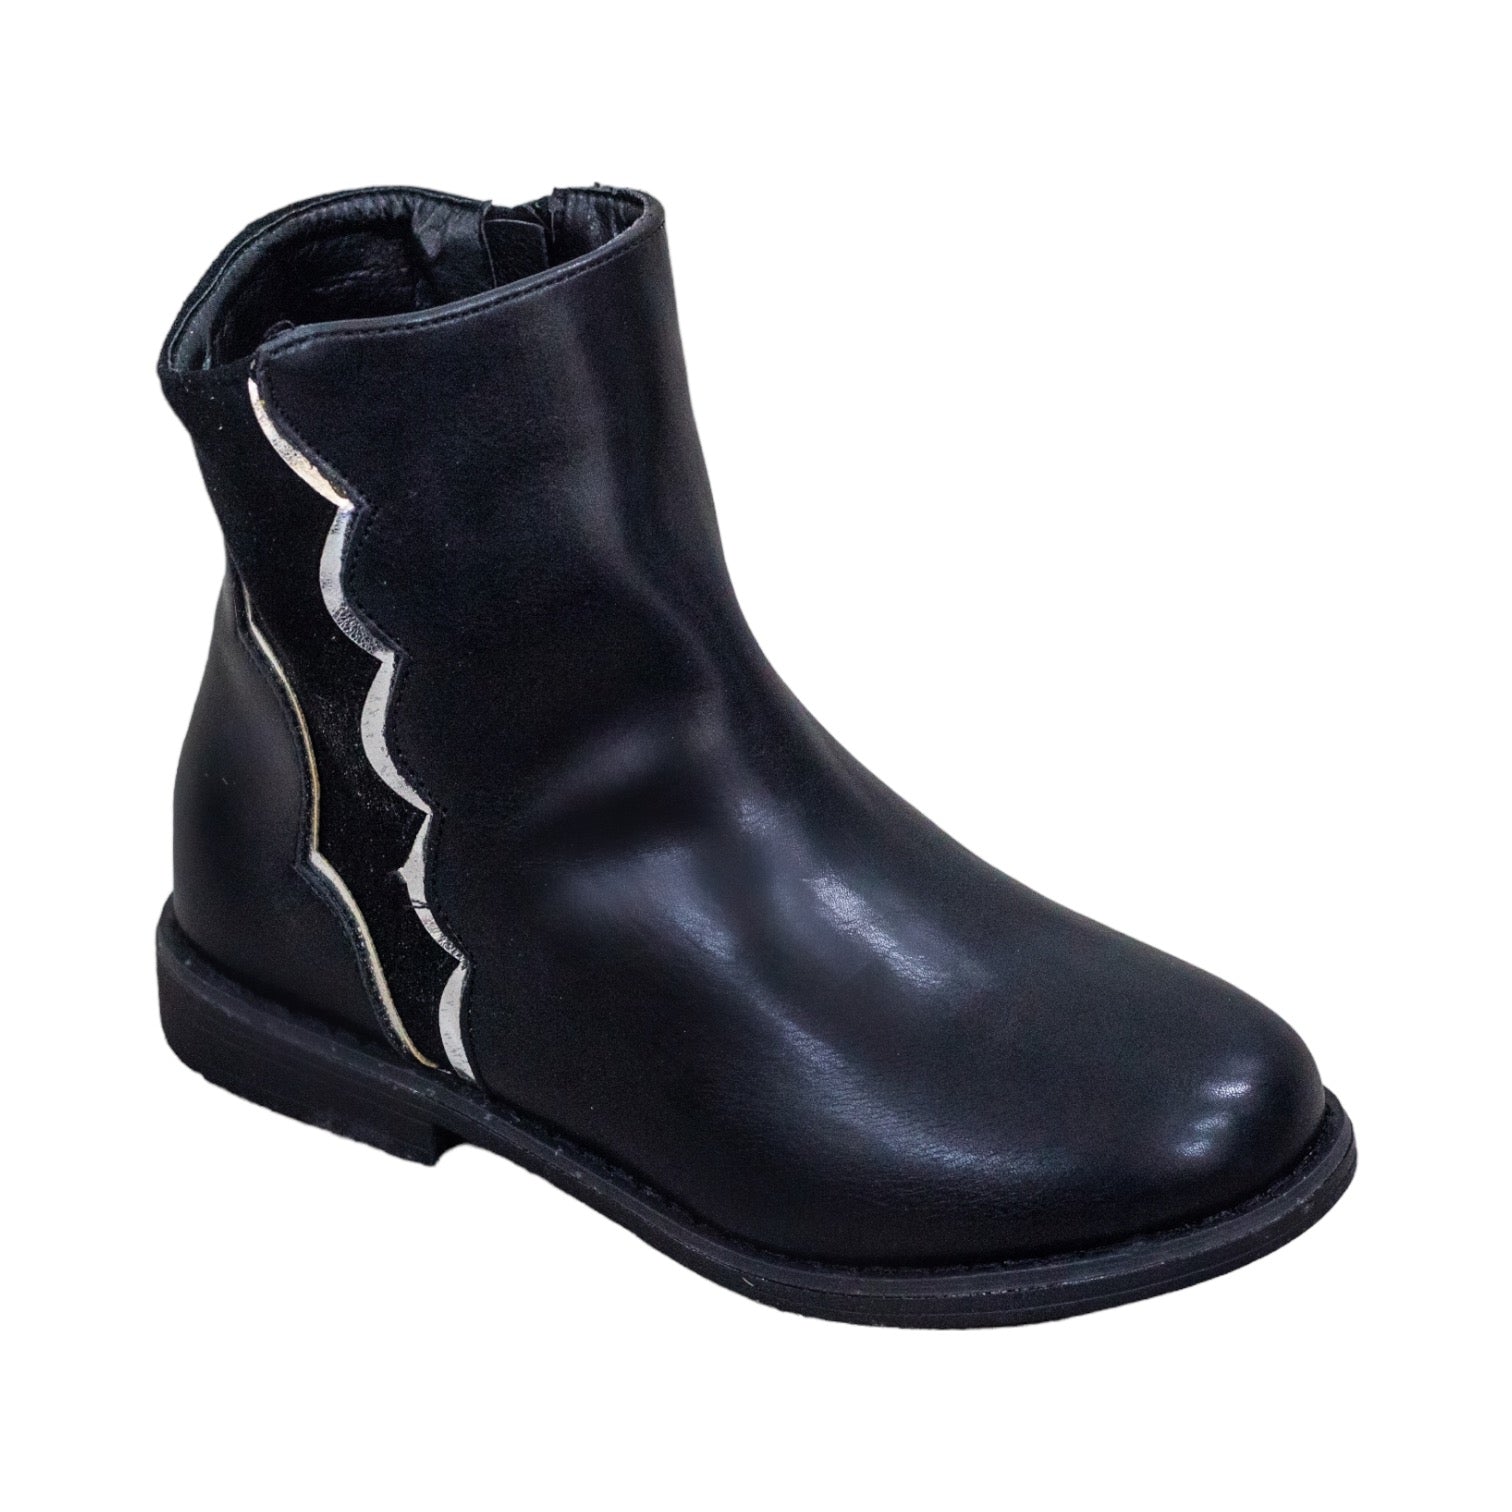 Black girls ankle boot with side detailed yesenia